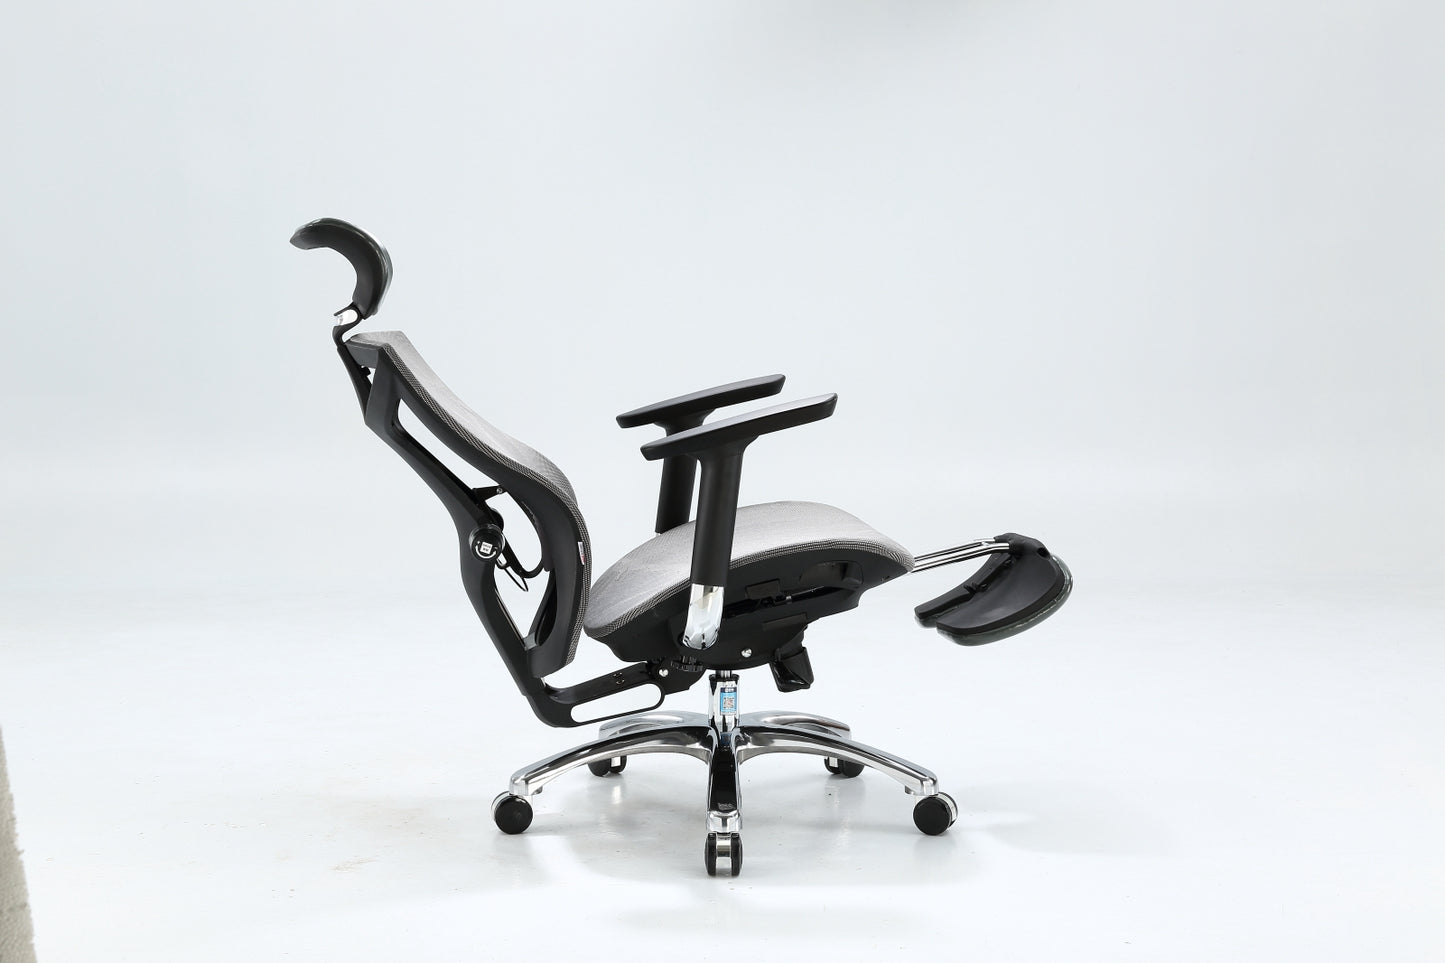 Sihoo V1 Ergonomic Chair (with built-in footrest)